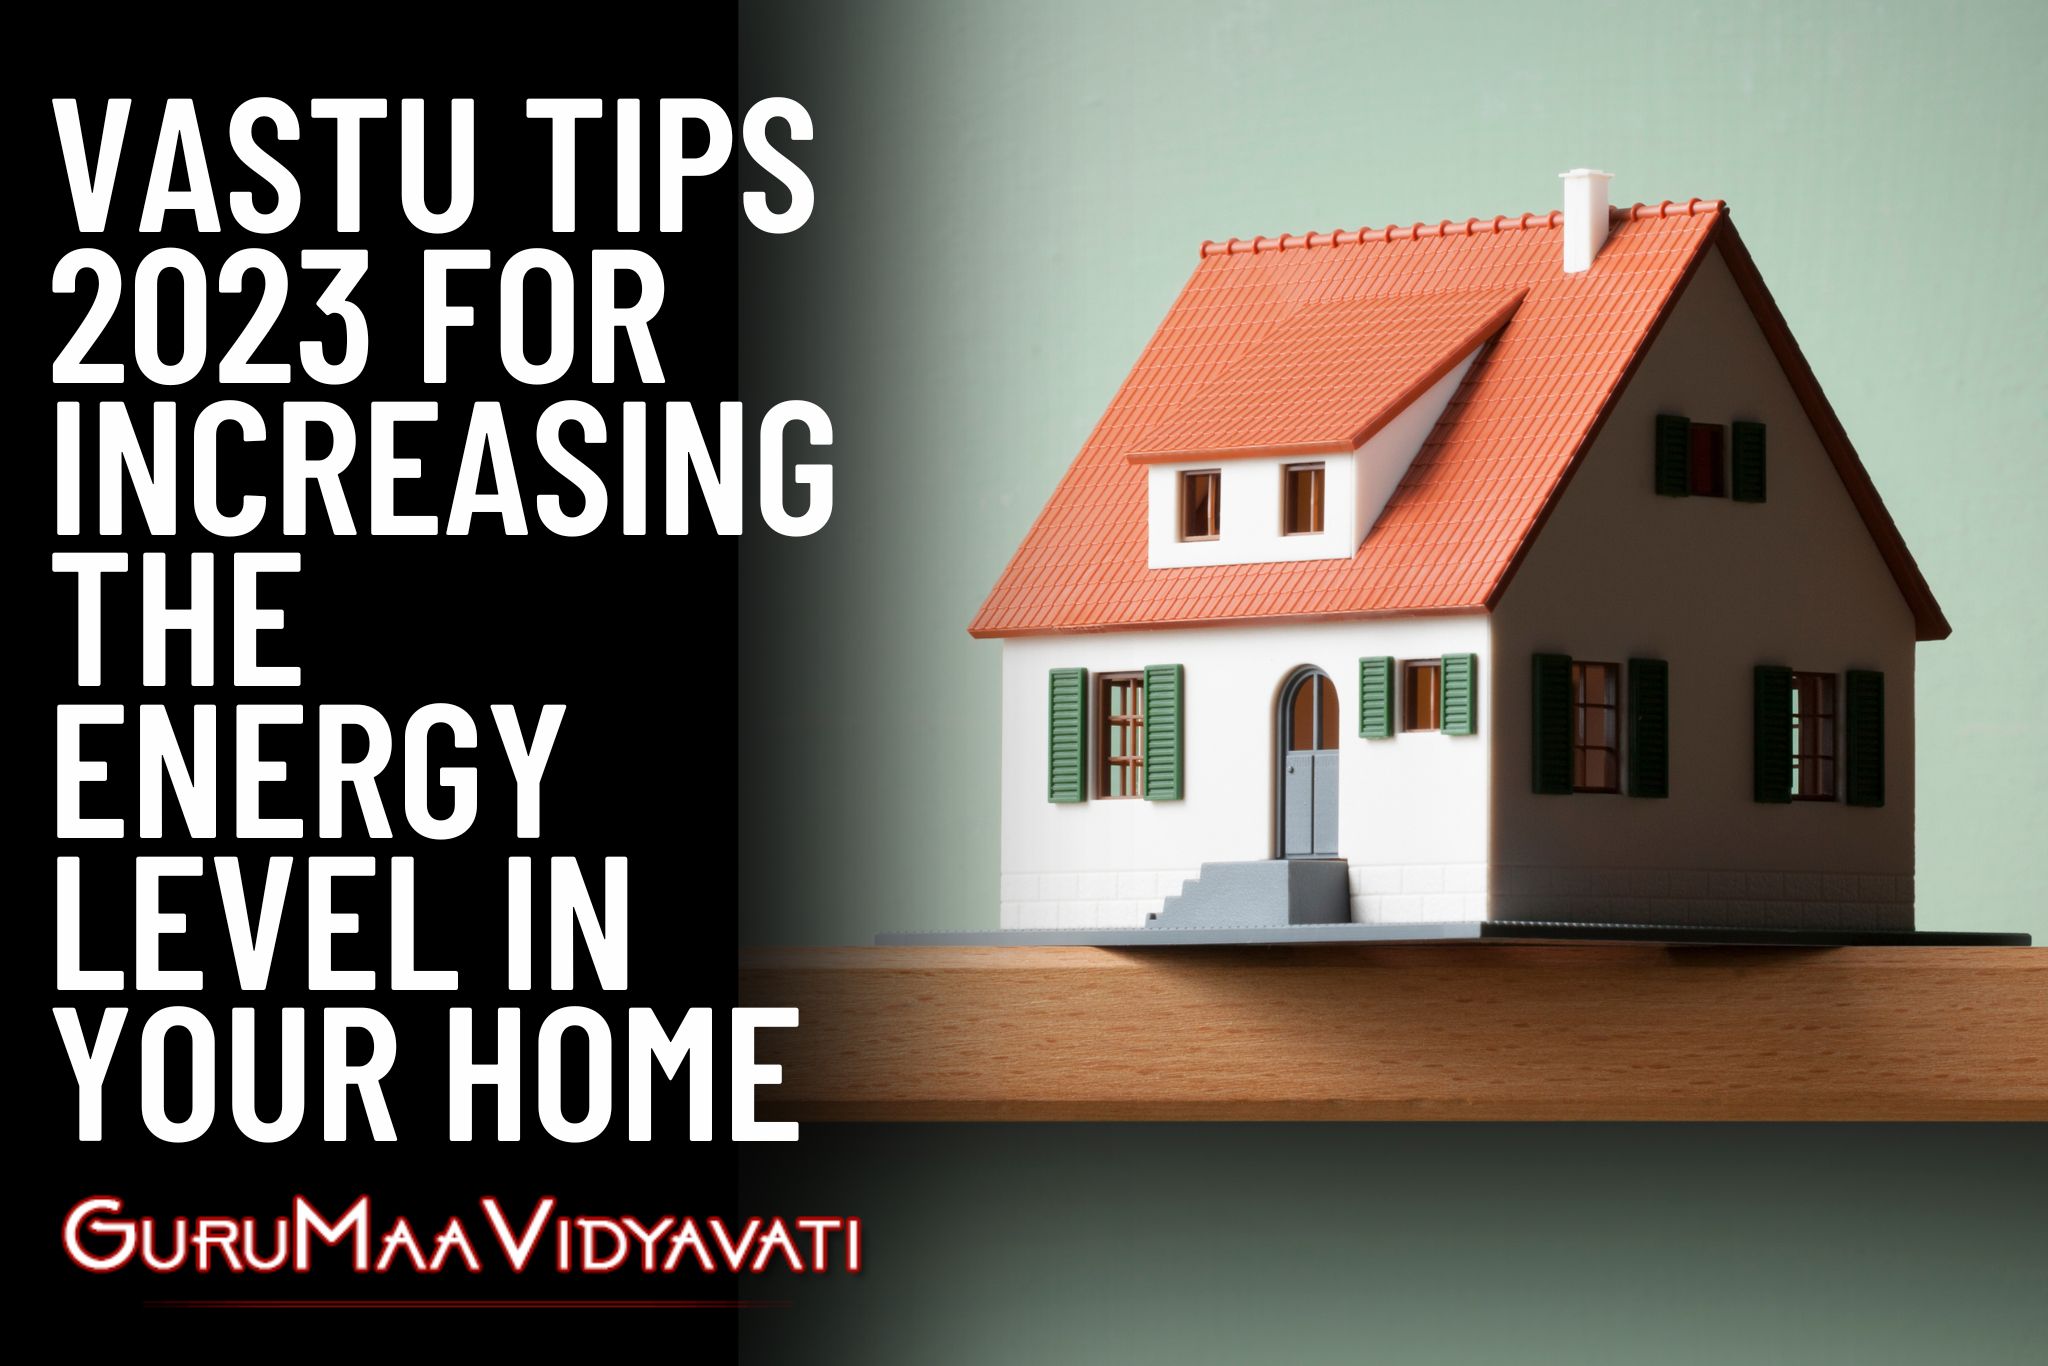 Follow These Vastu Tips 2023 For Increasing The Energy Level In Your Home